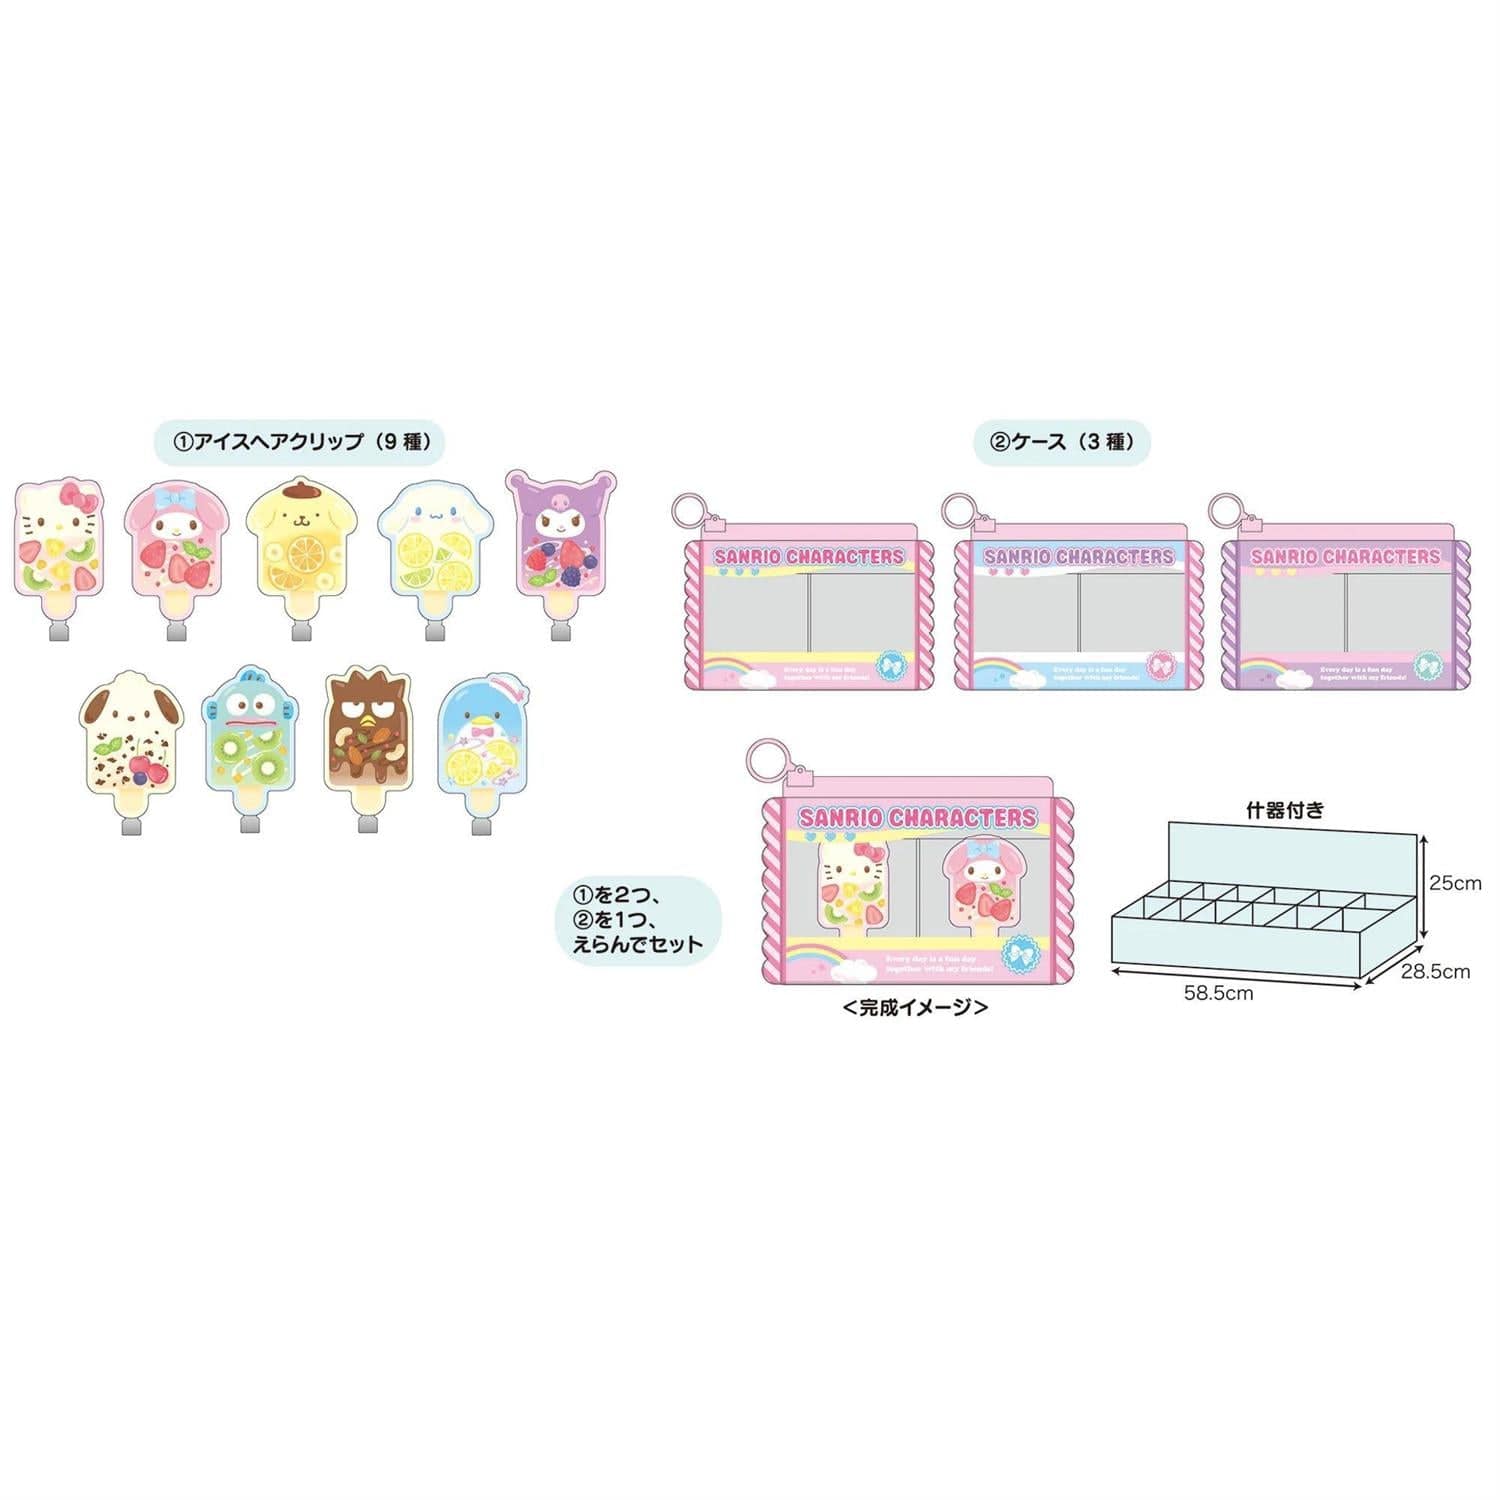 Sanrio Customizable Hair Clips and Pouch Set